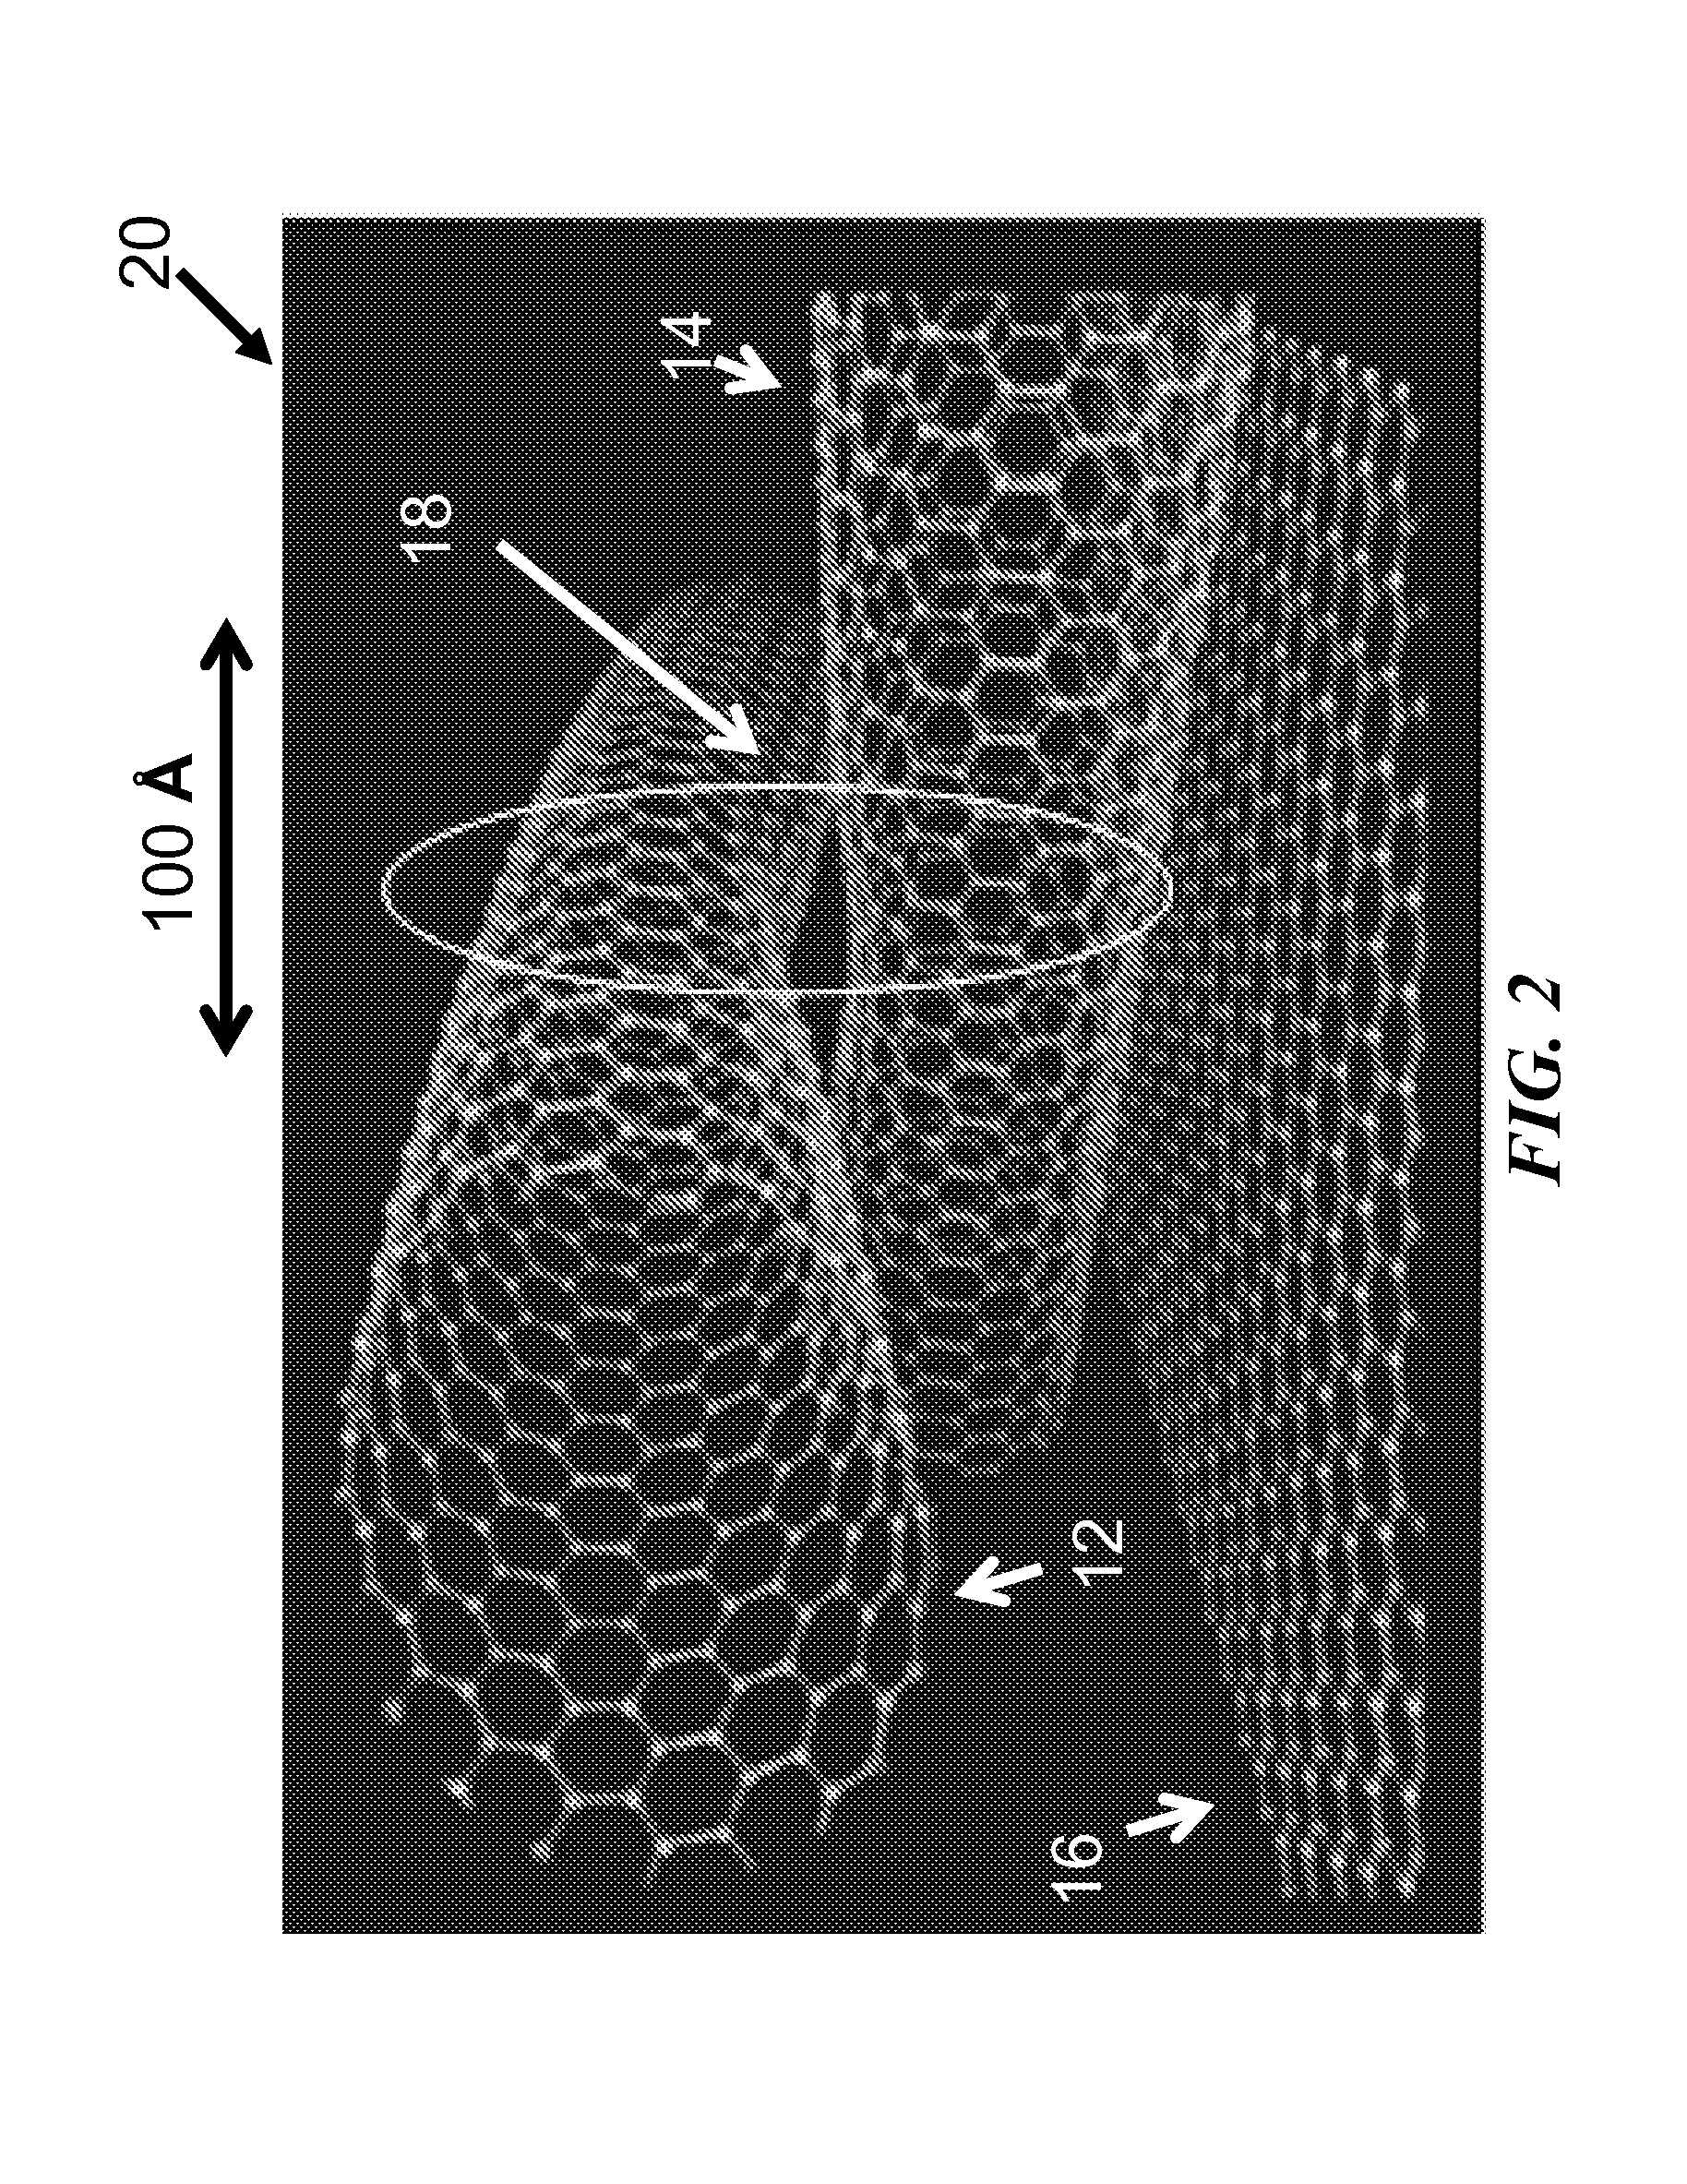 Method and system for improving conductivity of nanotube nets and related materials